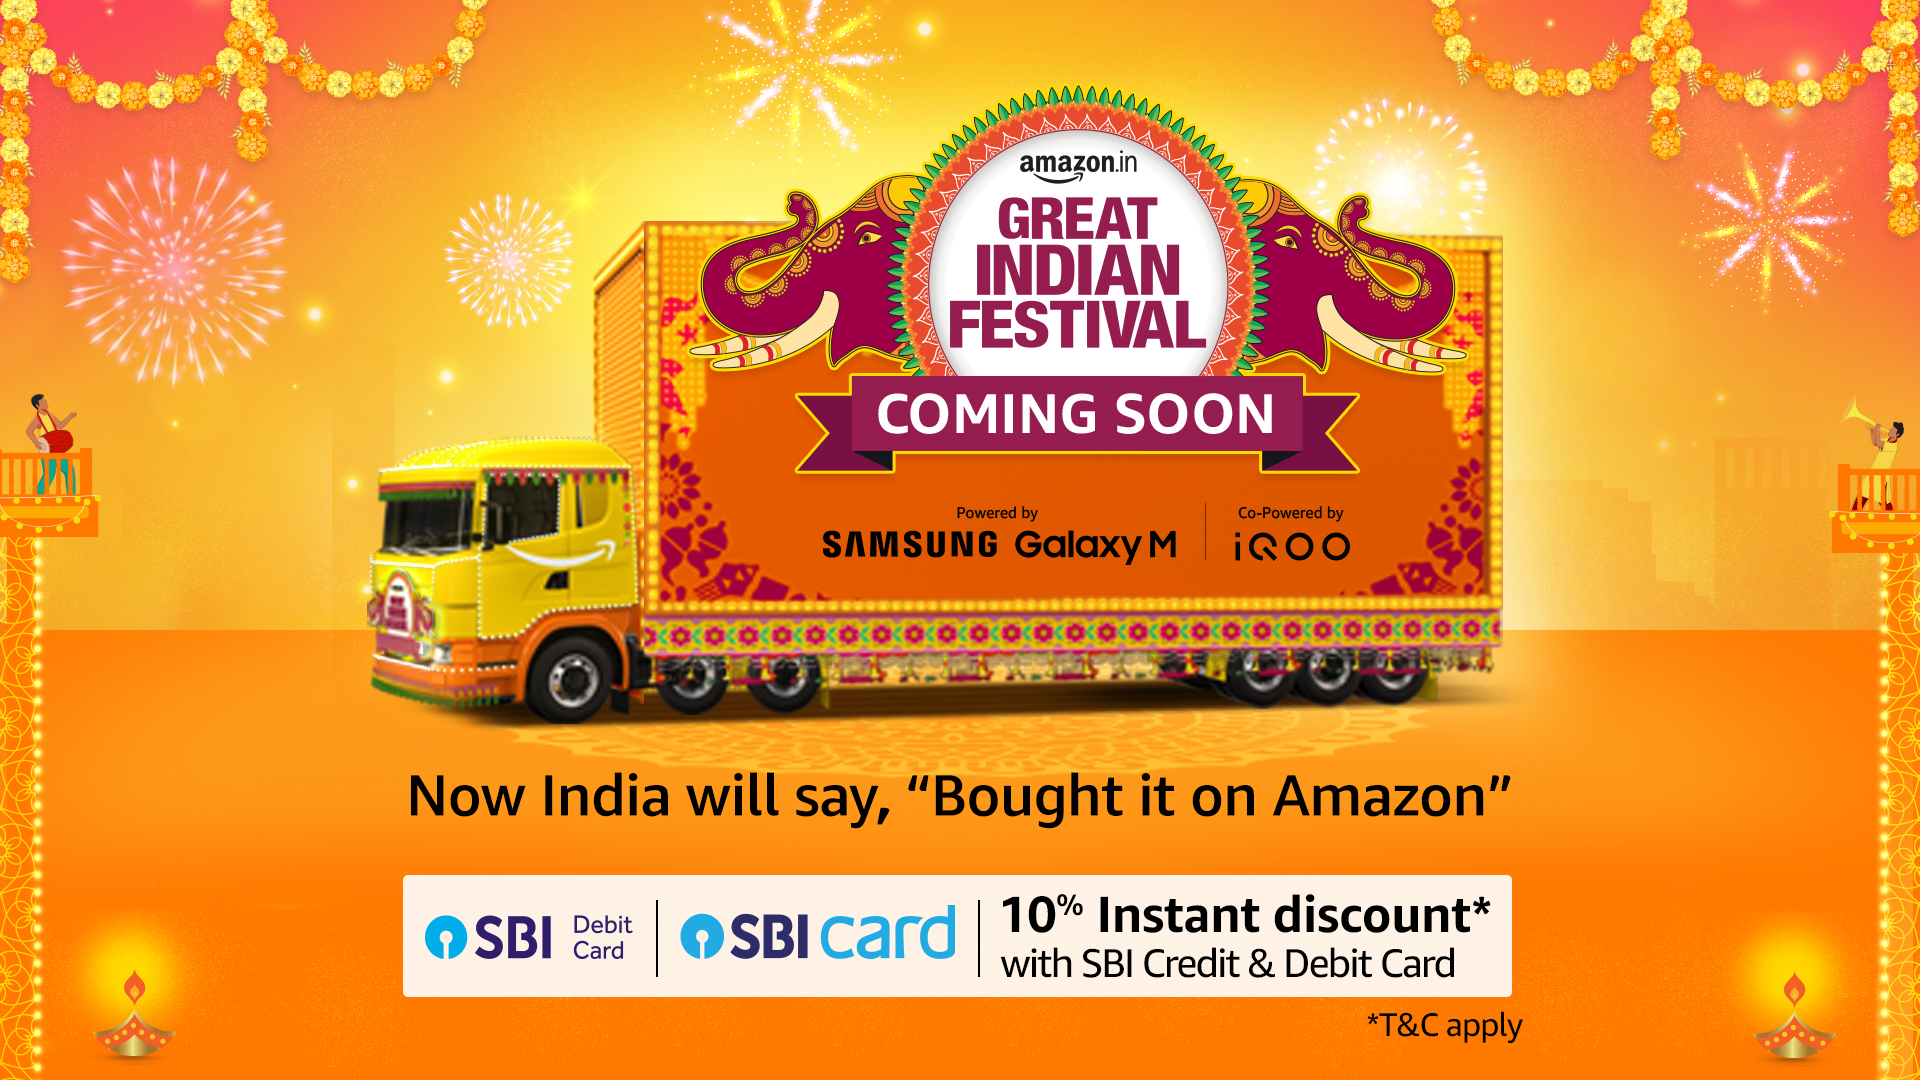 Amazon Great Indian Festival 2022 PDLoots